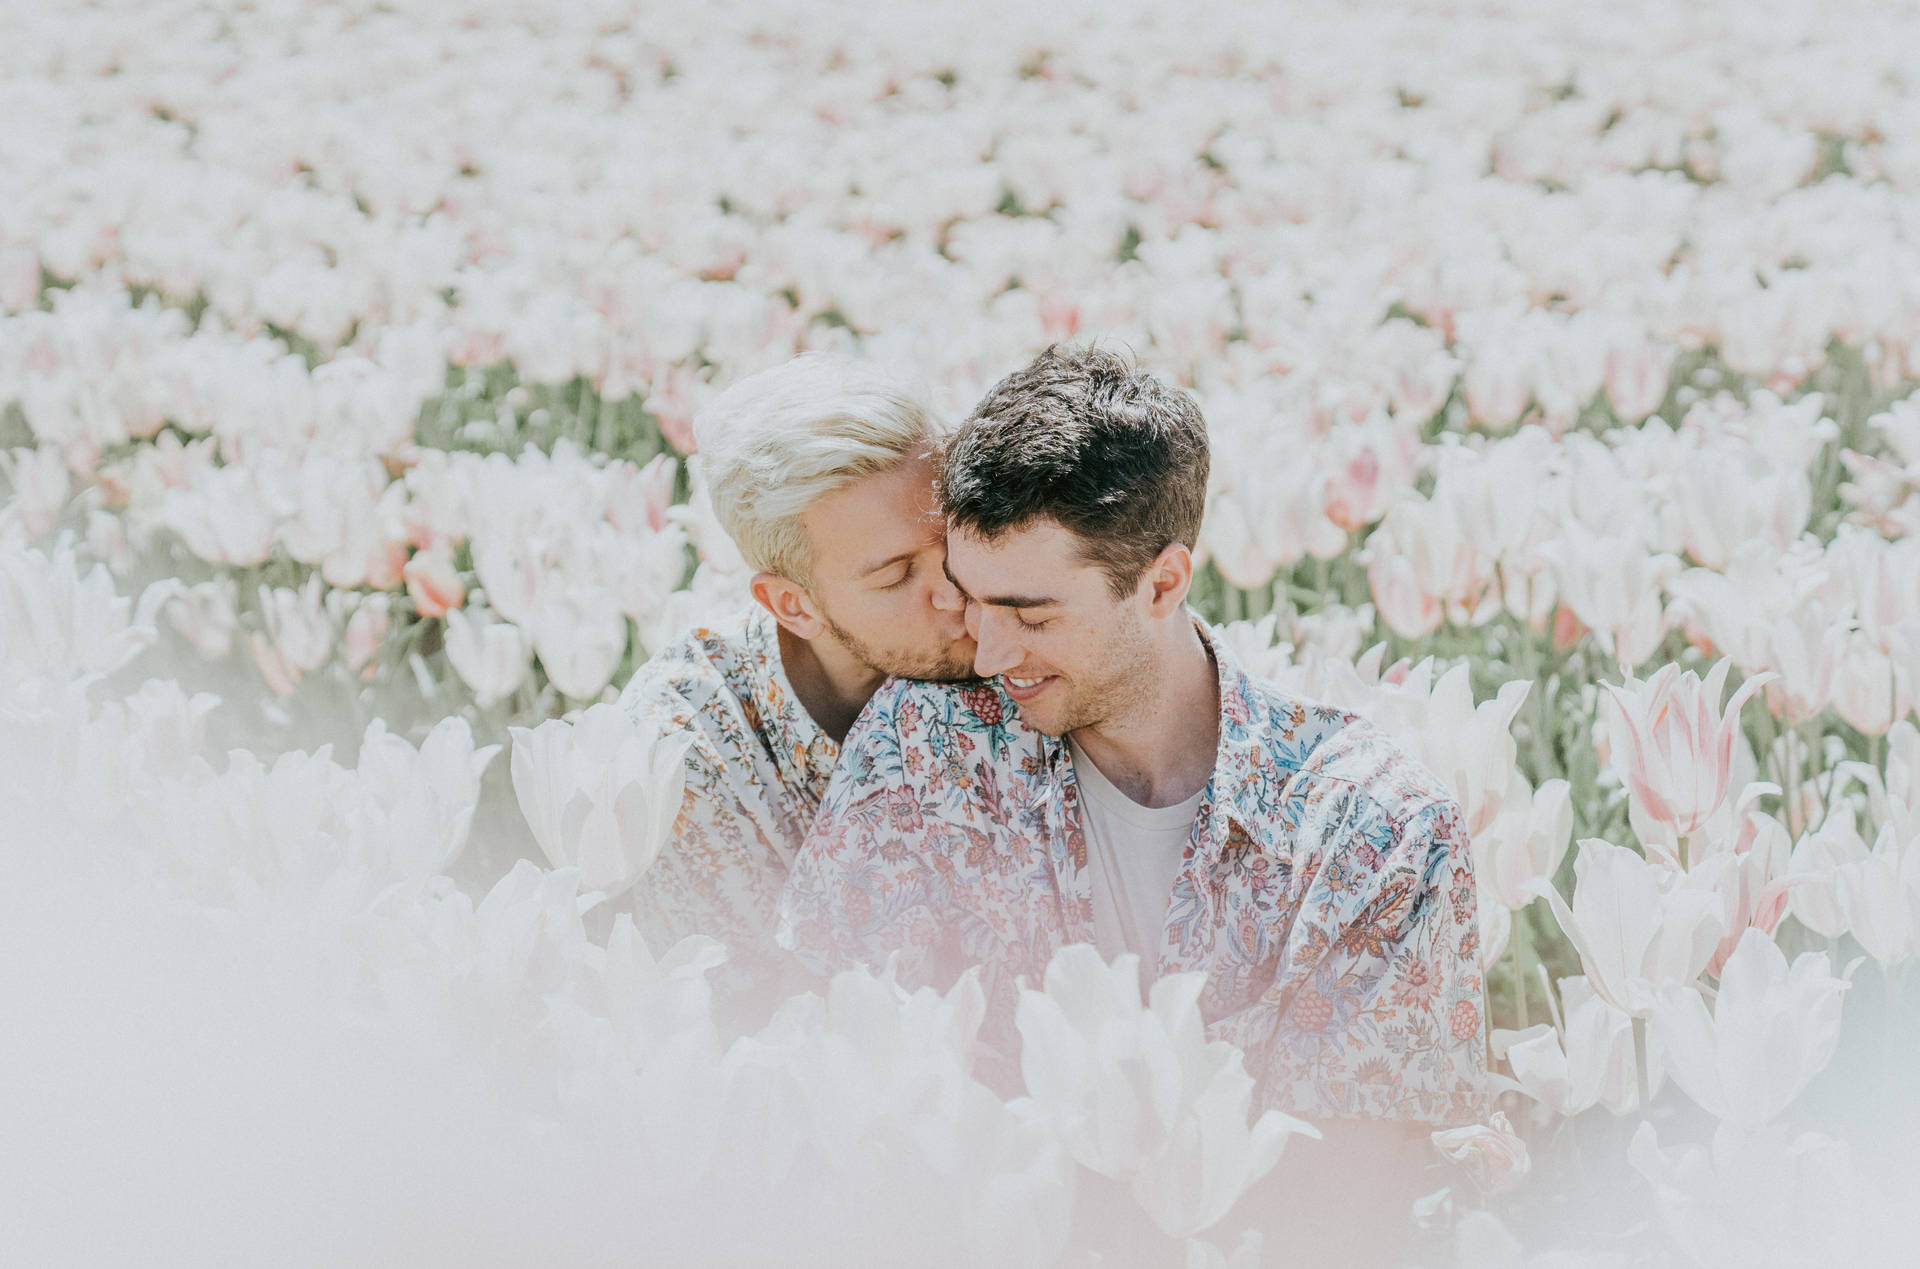 Gay Men Among Flowers Background